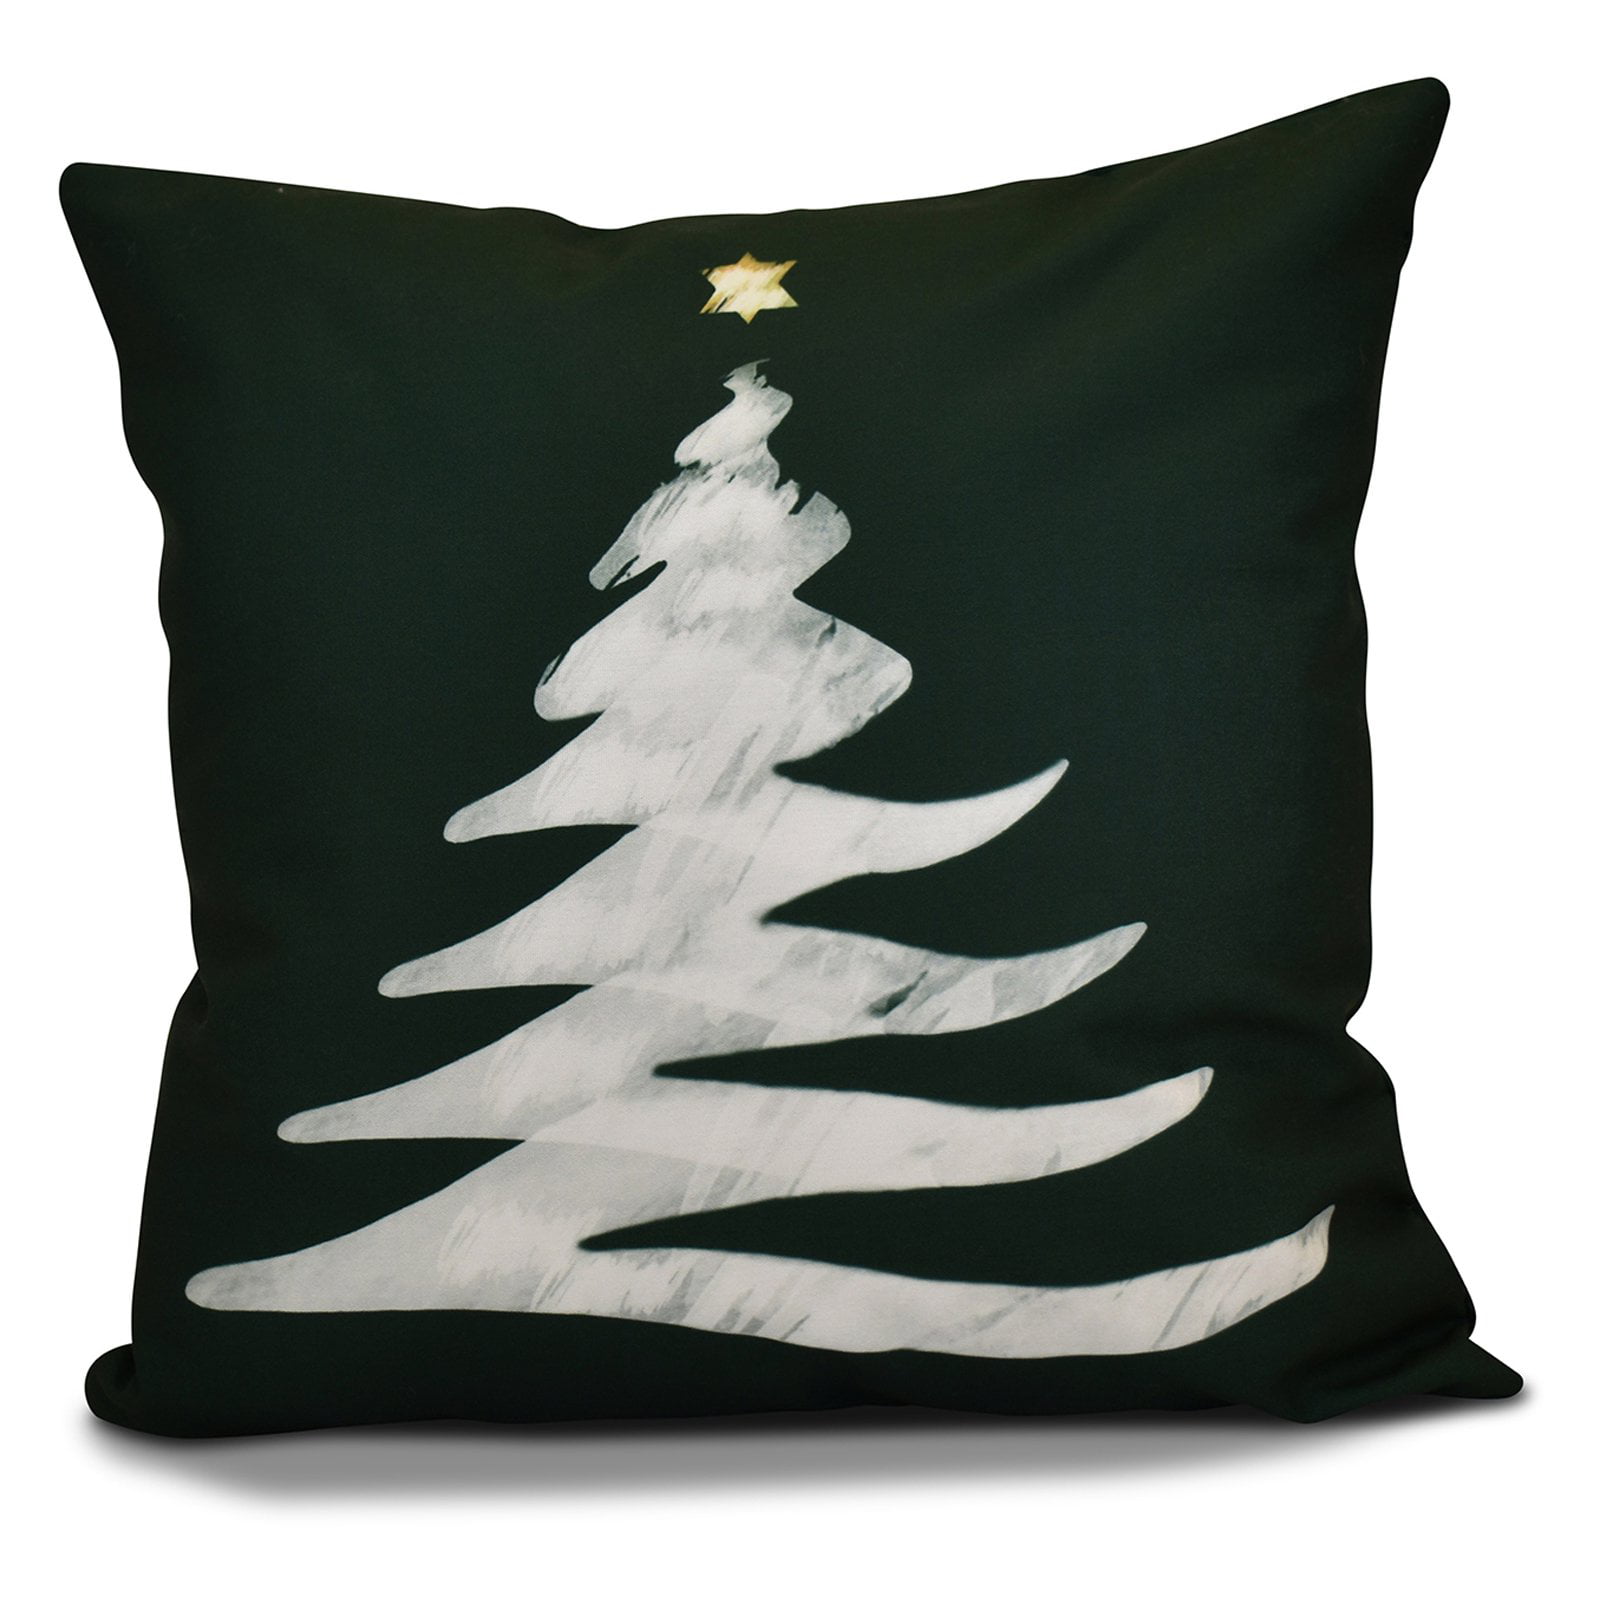 Garland Tree Pillow Gray 18x18 Black E by design PHGN705GY1RE6-18 18 x 18-inch